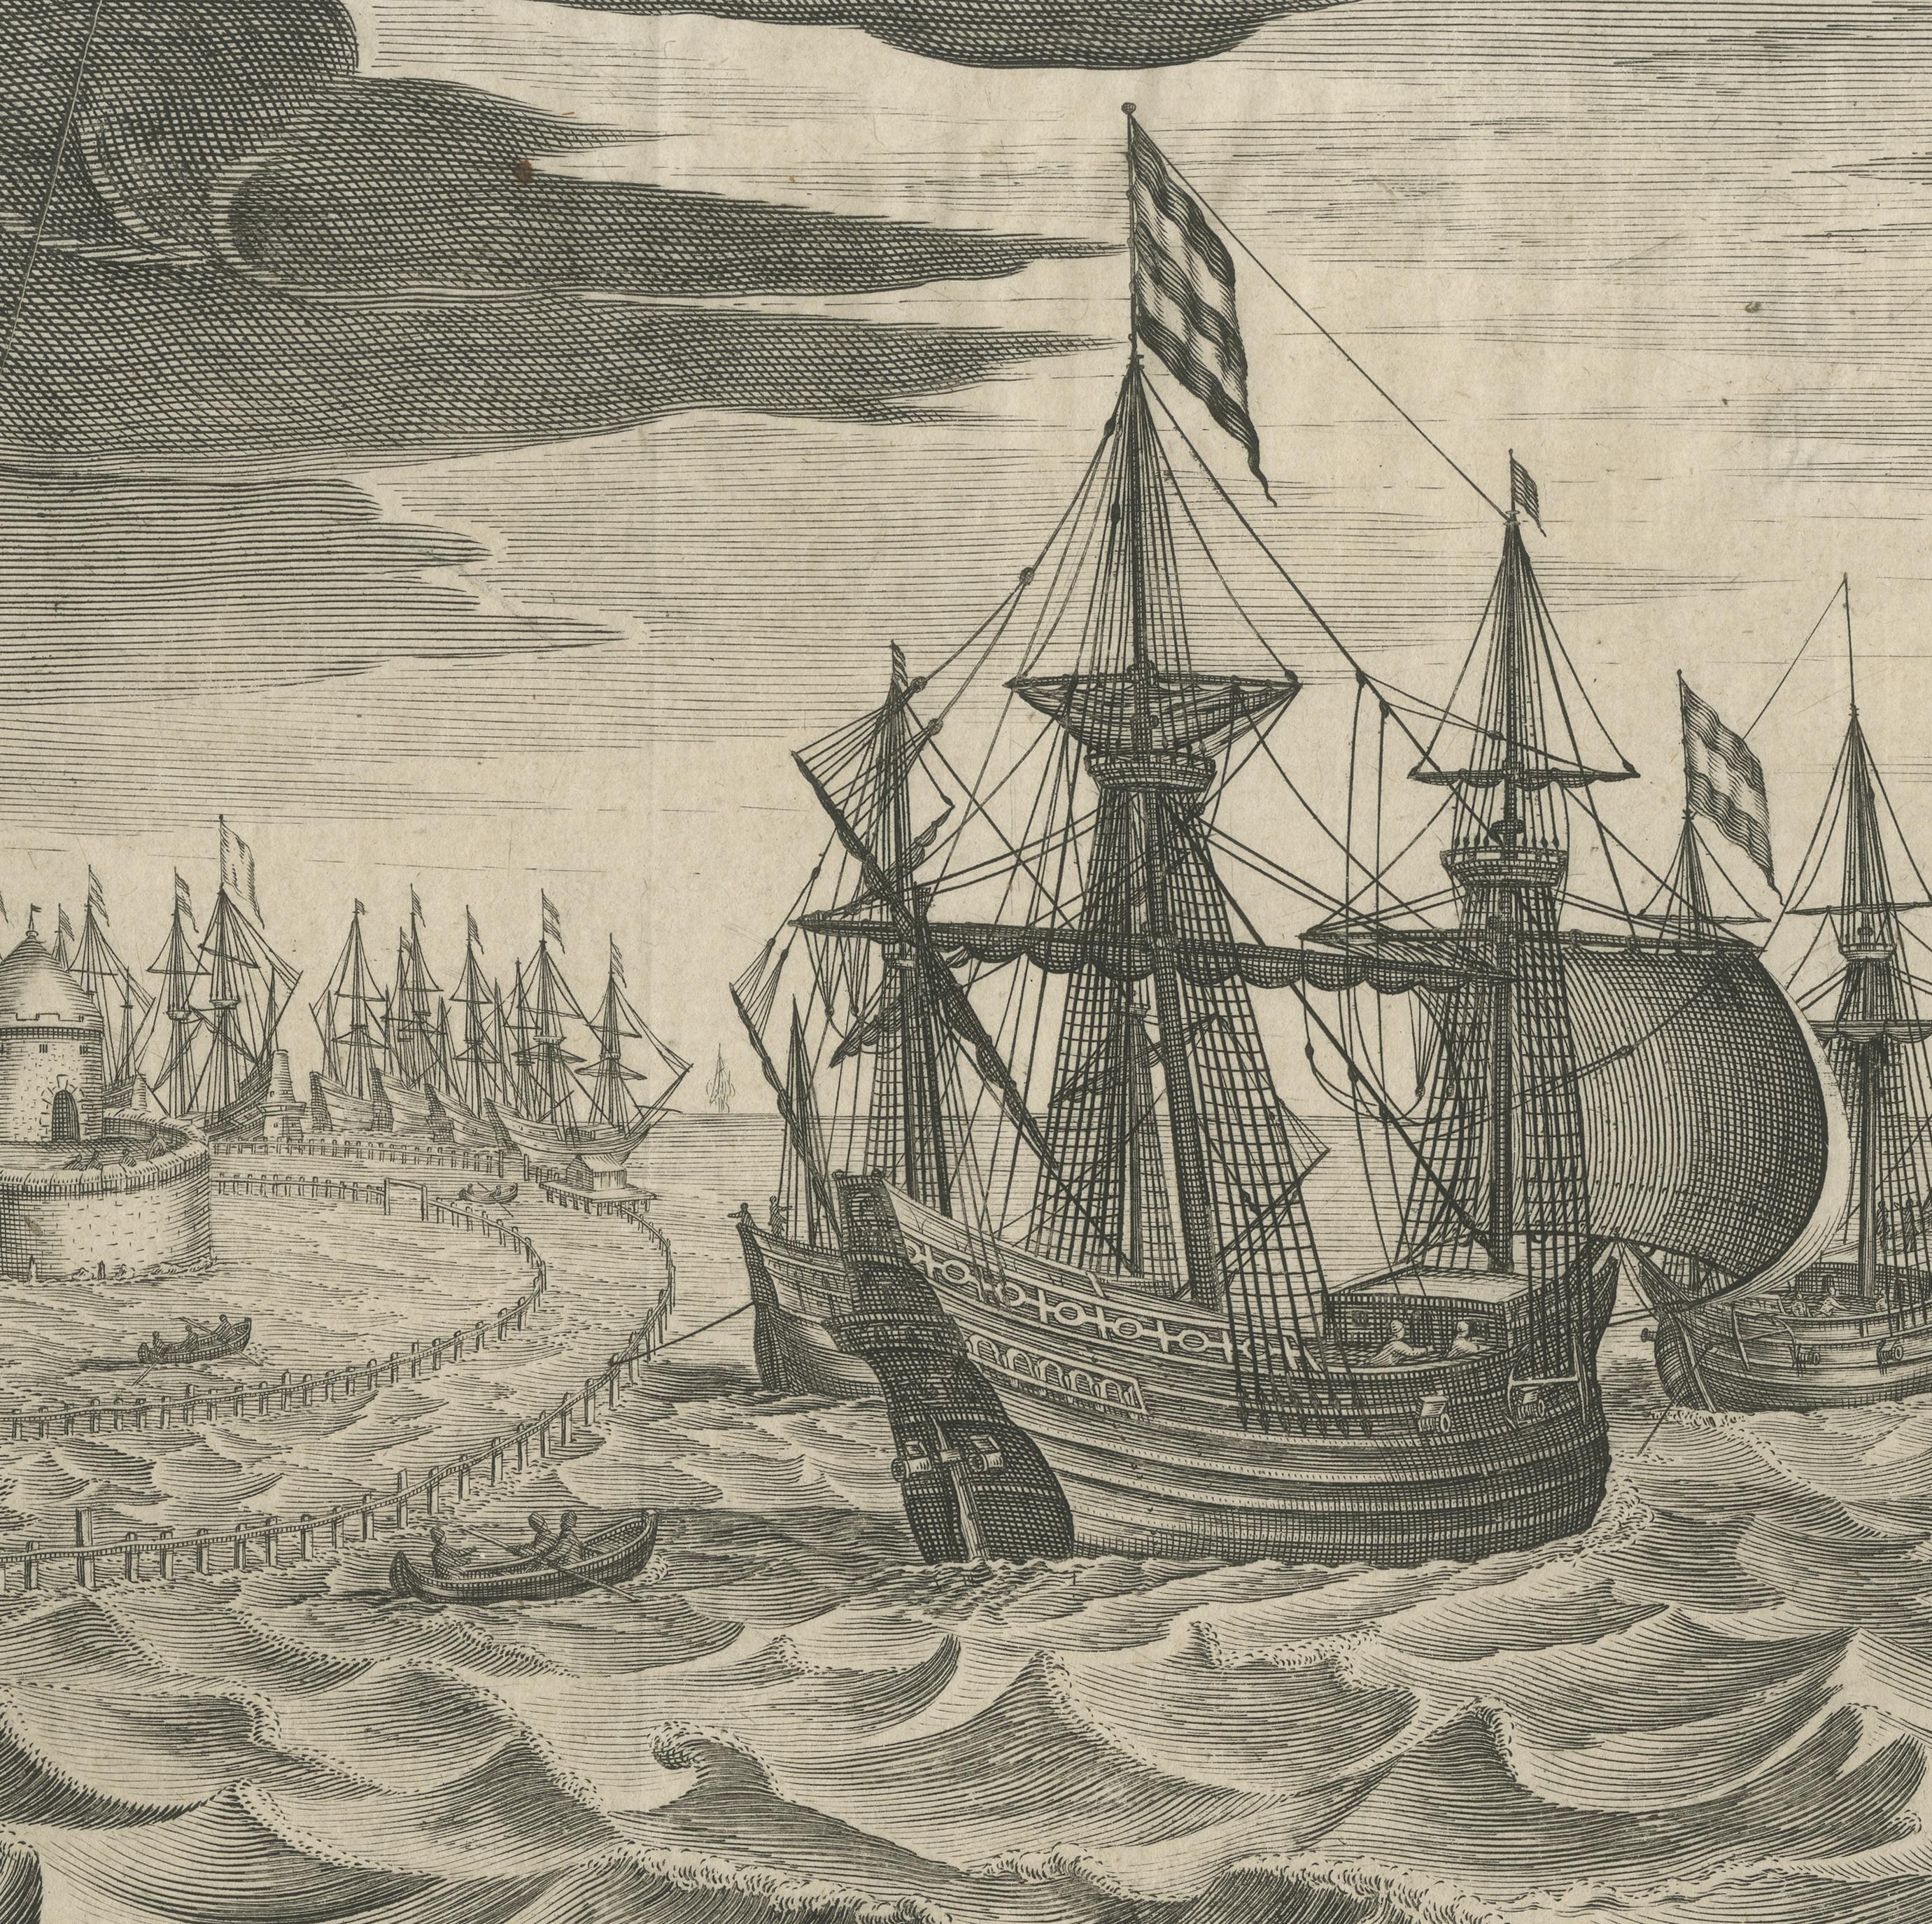 Extremely rare original antique print of a fleet of nine ships departing from Amsterdam for a voyage to the East Indies, 1603. This may be the second voyage to the East Indies for the VOC under Steven van der Hagen, 1603-1608. With four-line caption